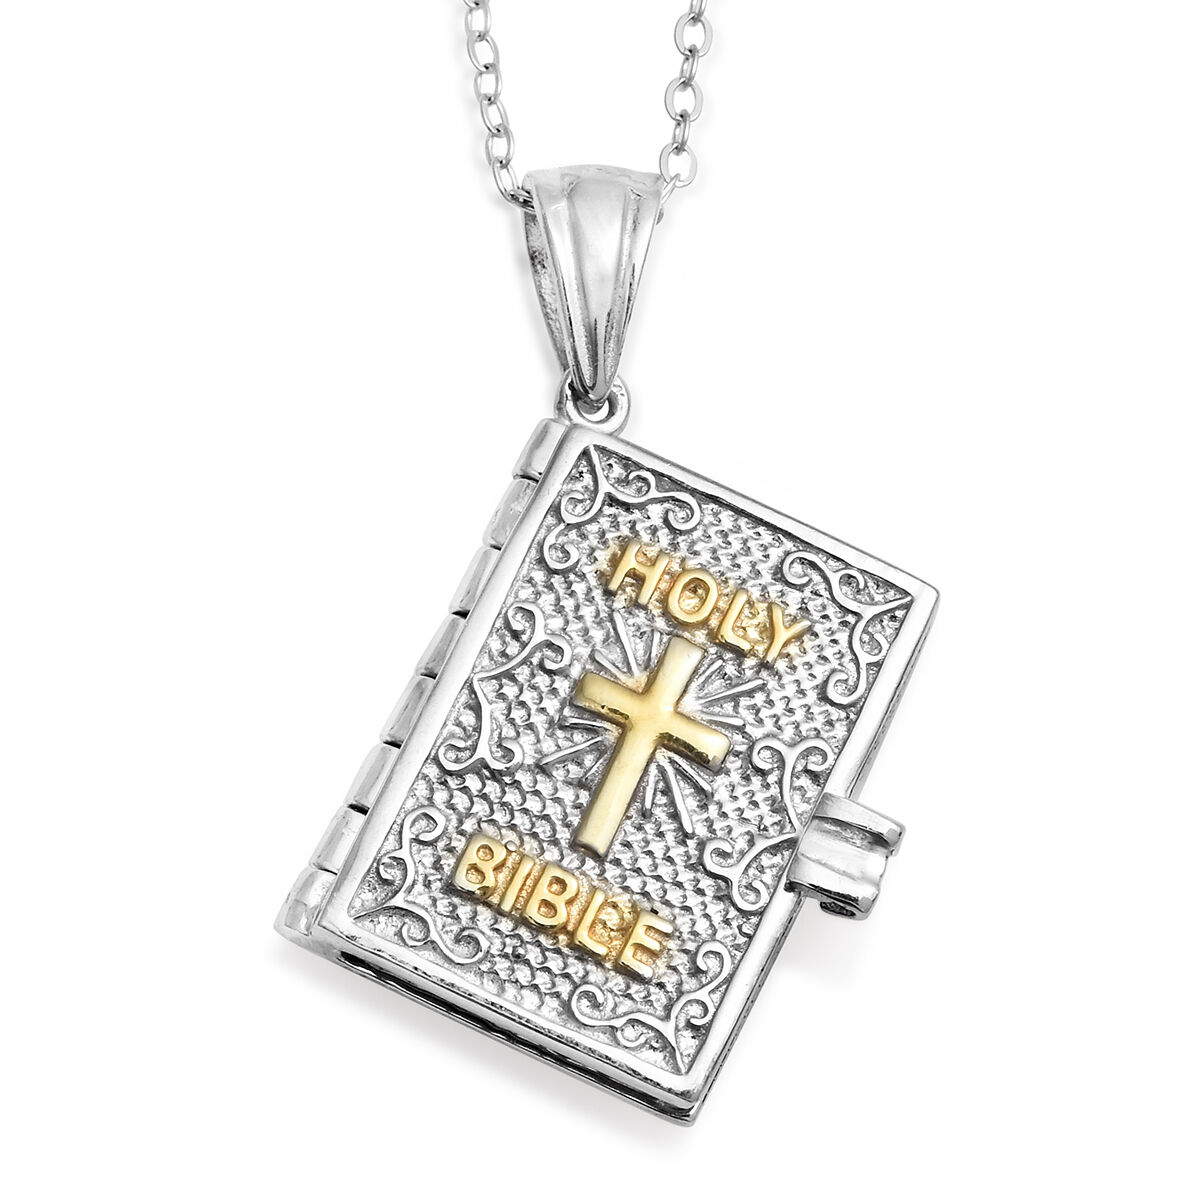 In Season Jewelry Cross Religious Holy Bible Photo Locket Remembrance Pendant Necklace 19 